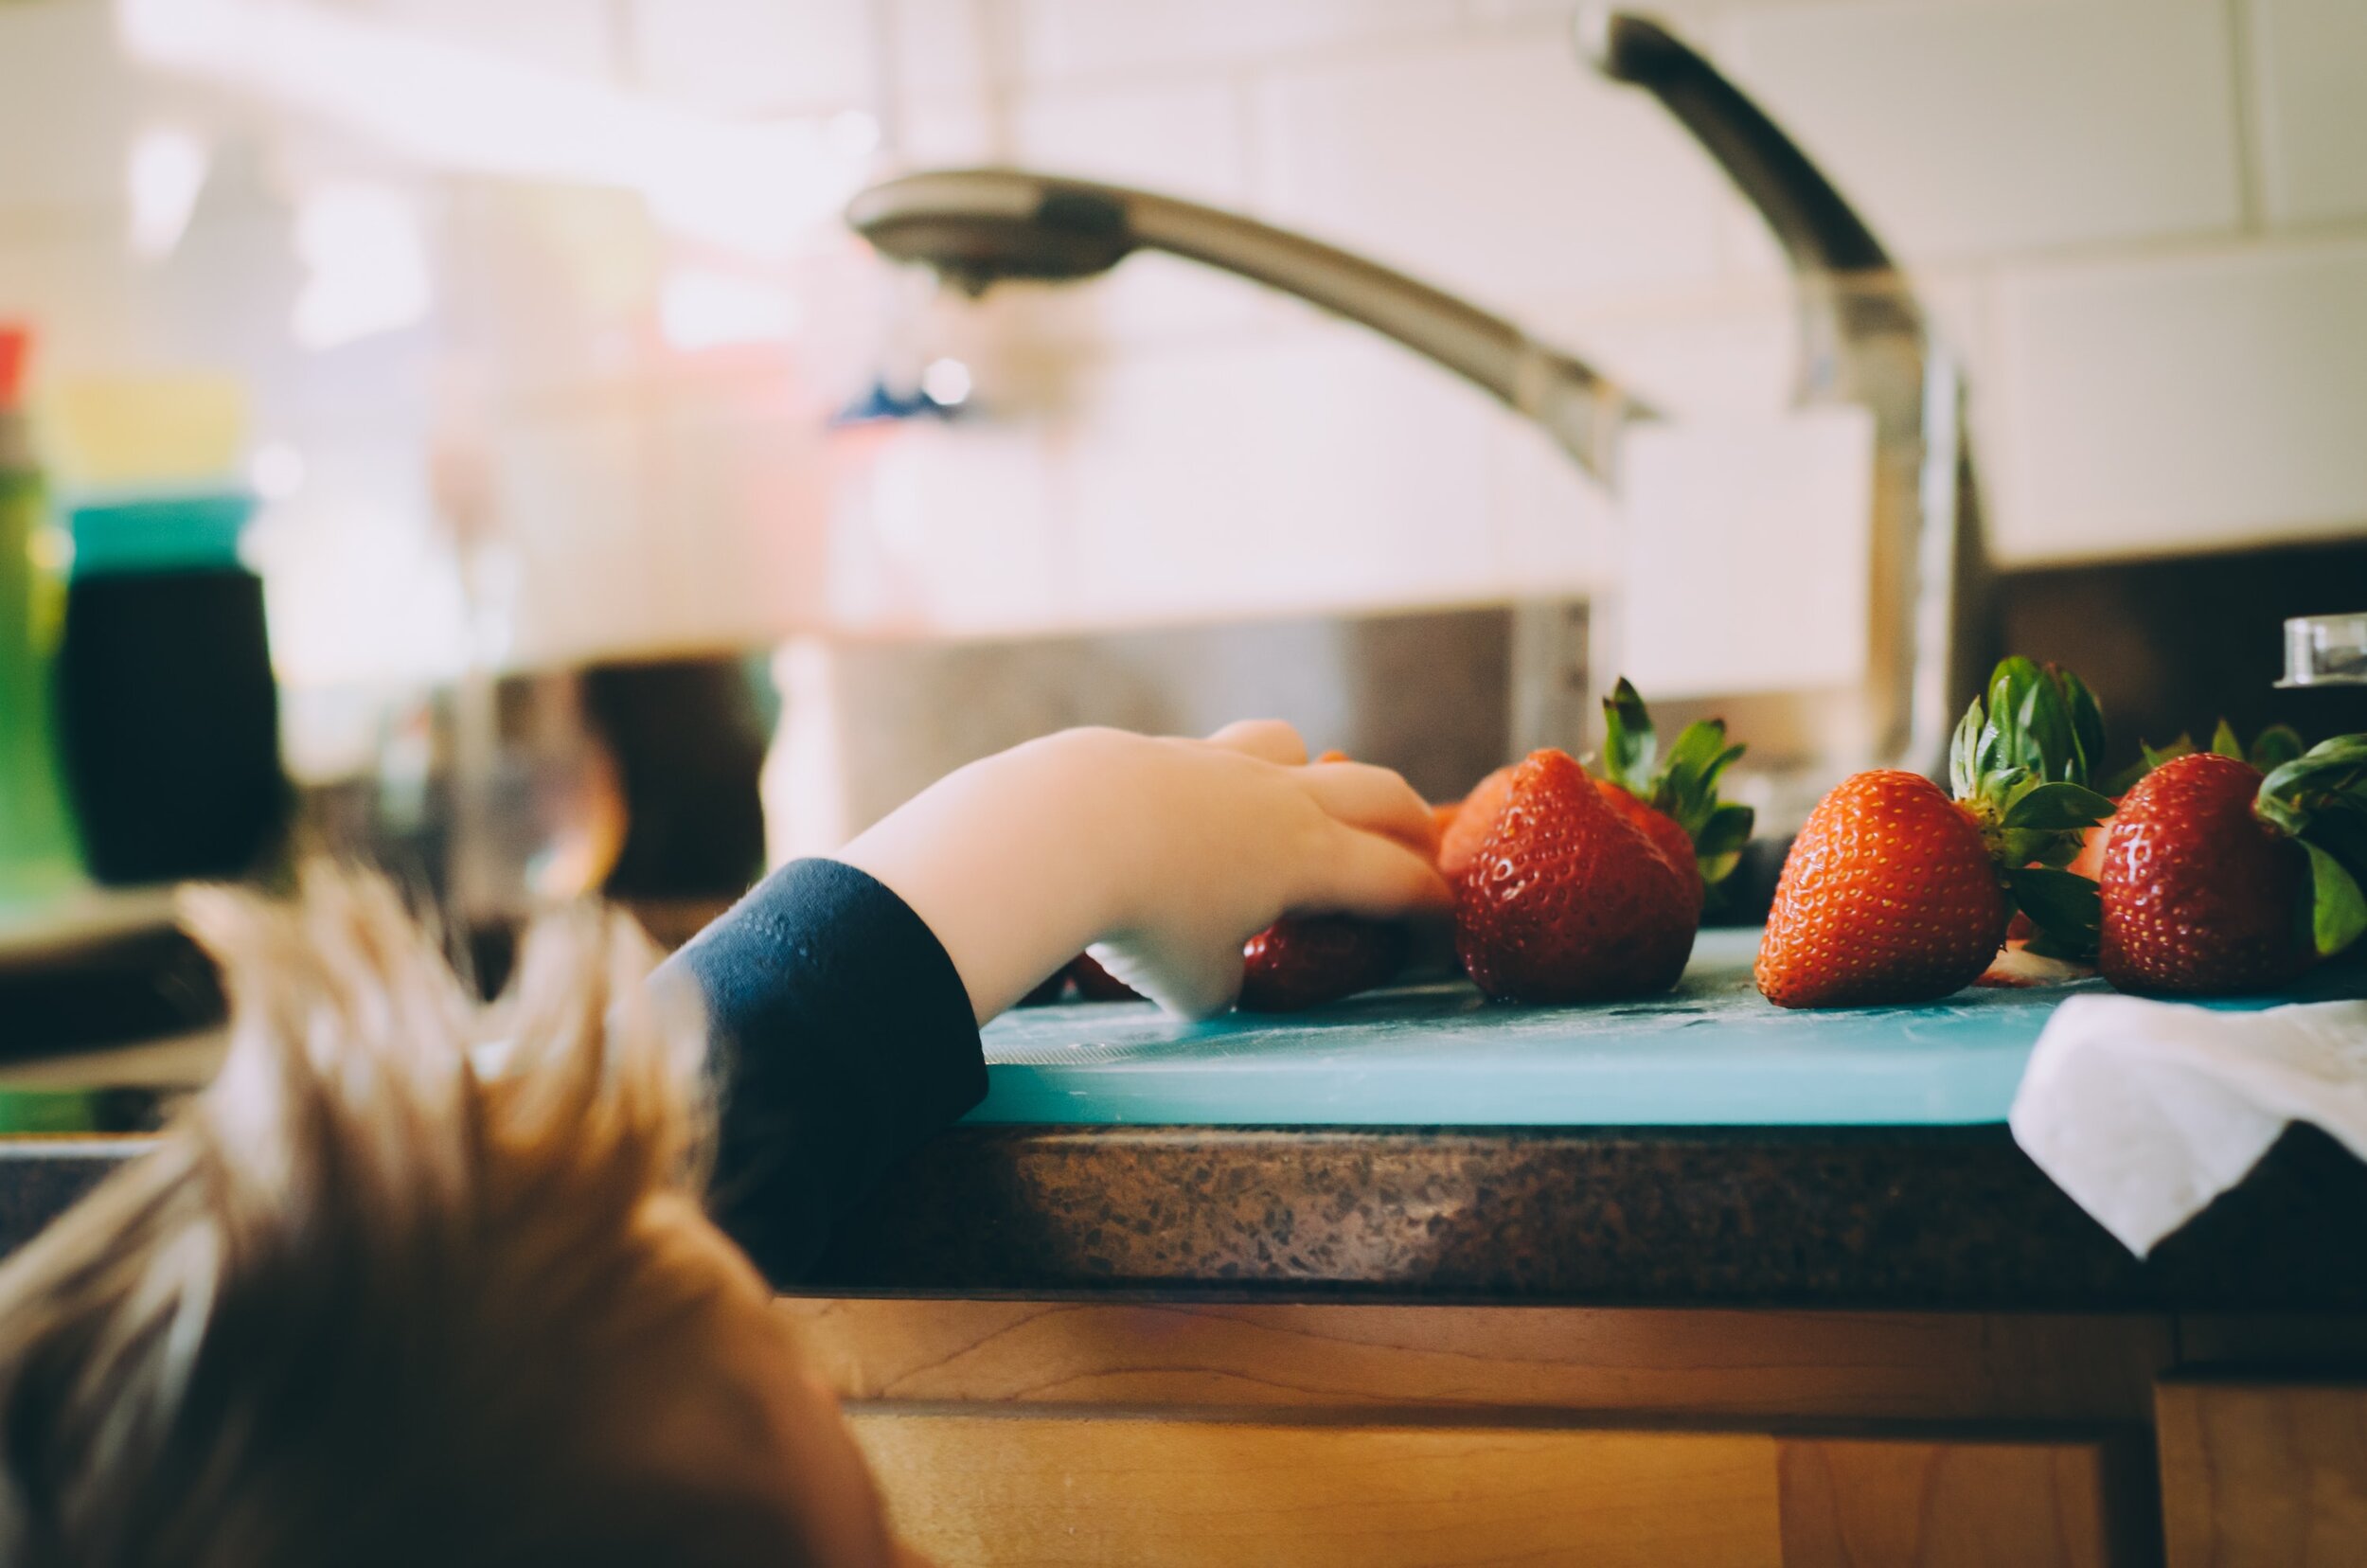 5 Quick Tips On How To Get Kids To Eat Healthy - The Swole Kitchen .jpg